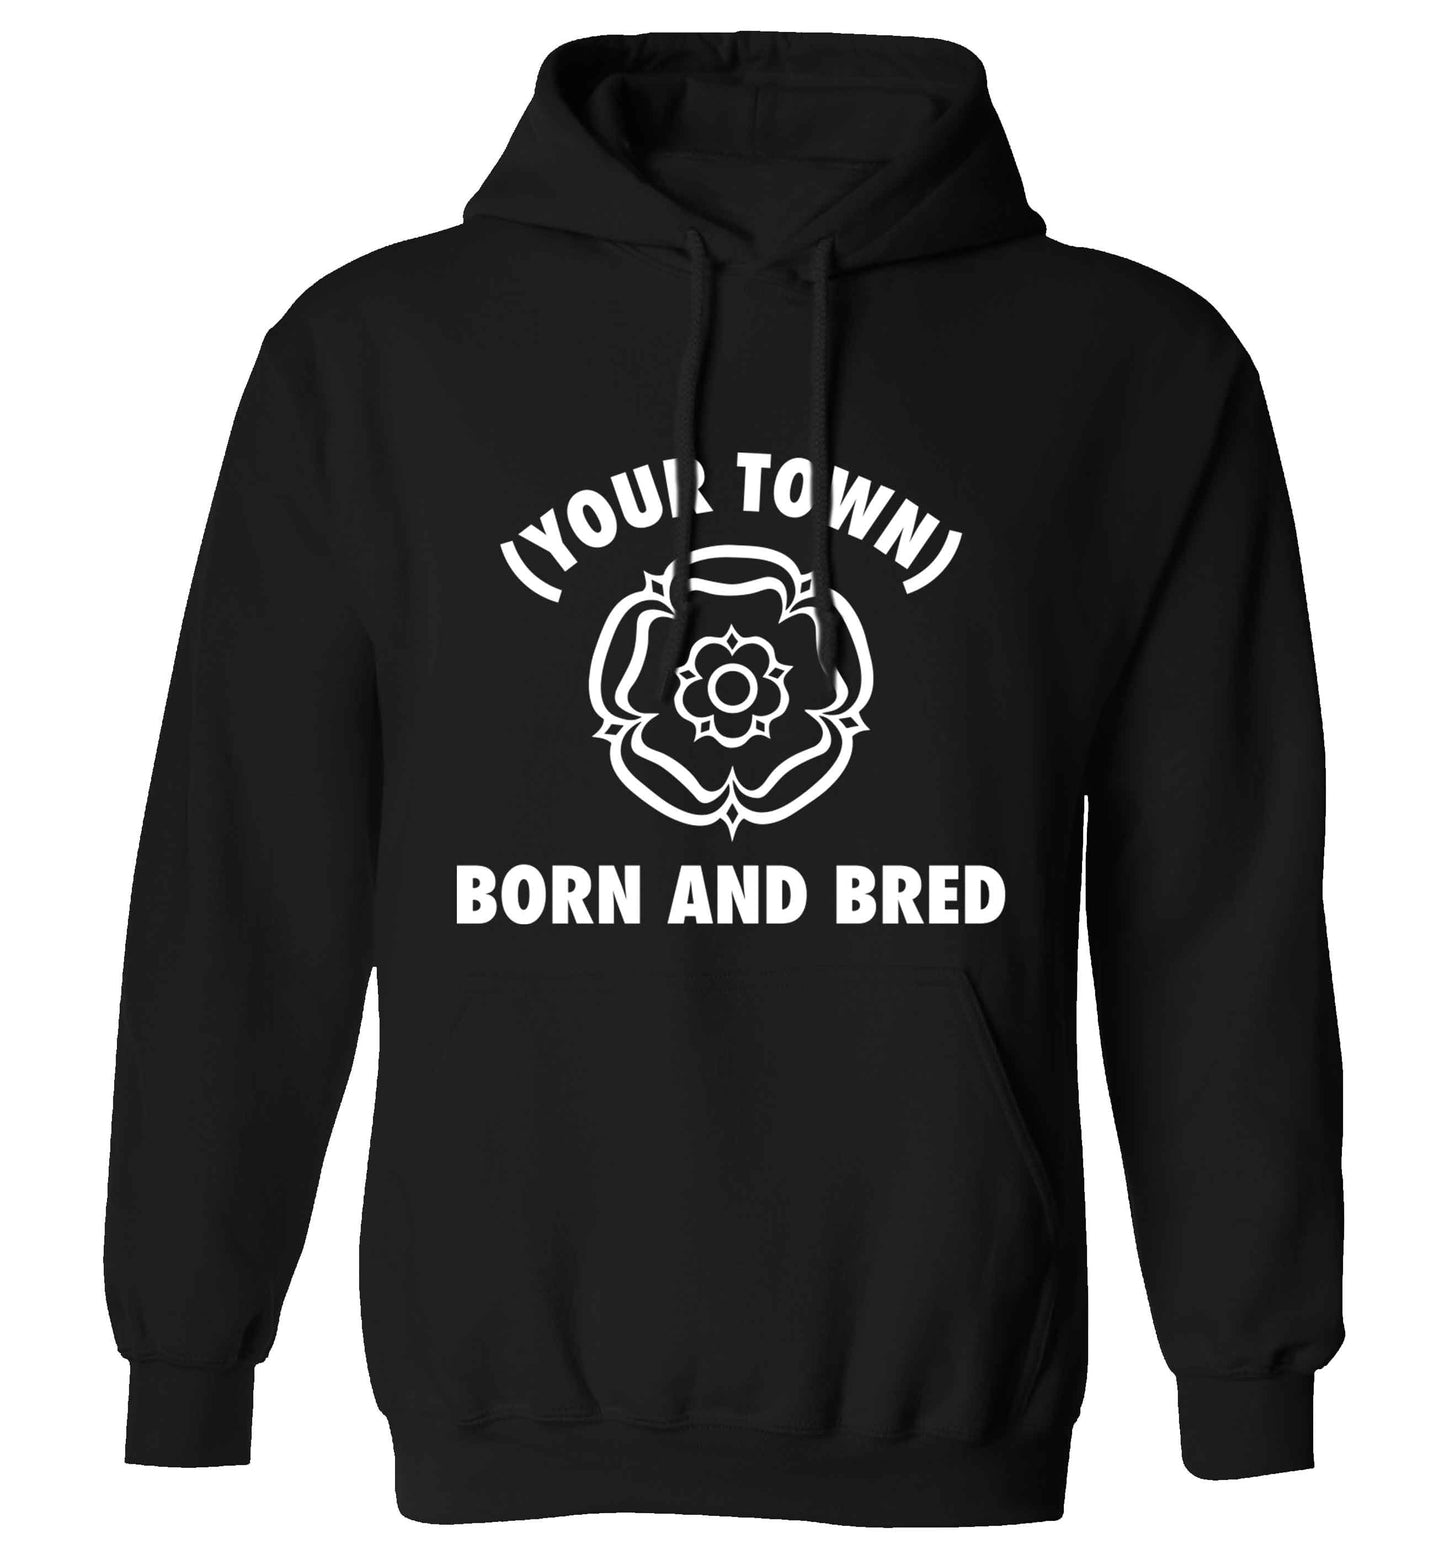 Personalised born and bred adults unisex black hoodie 2XL